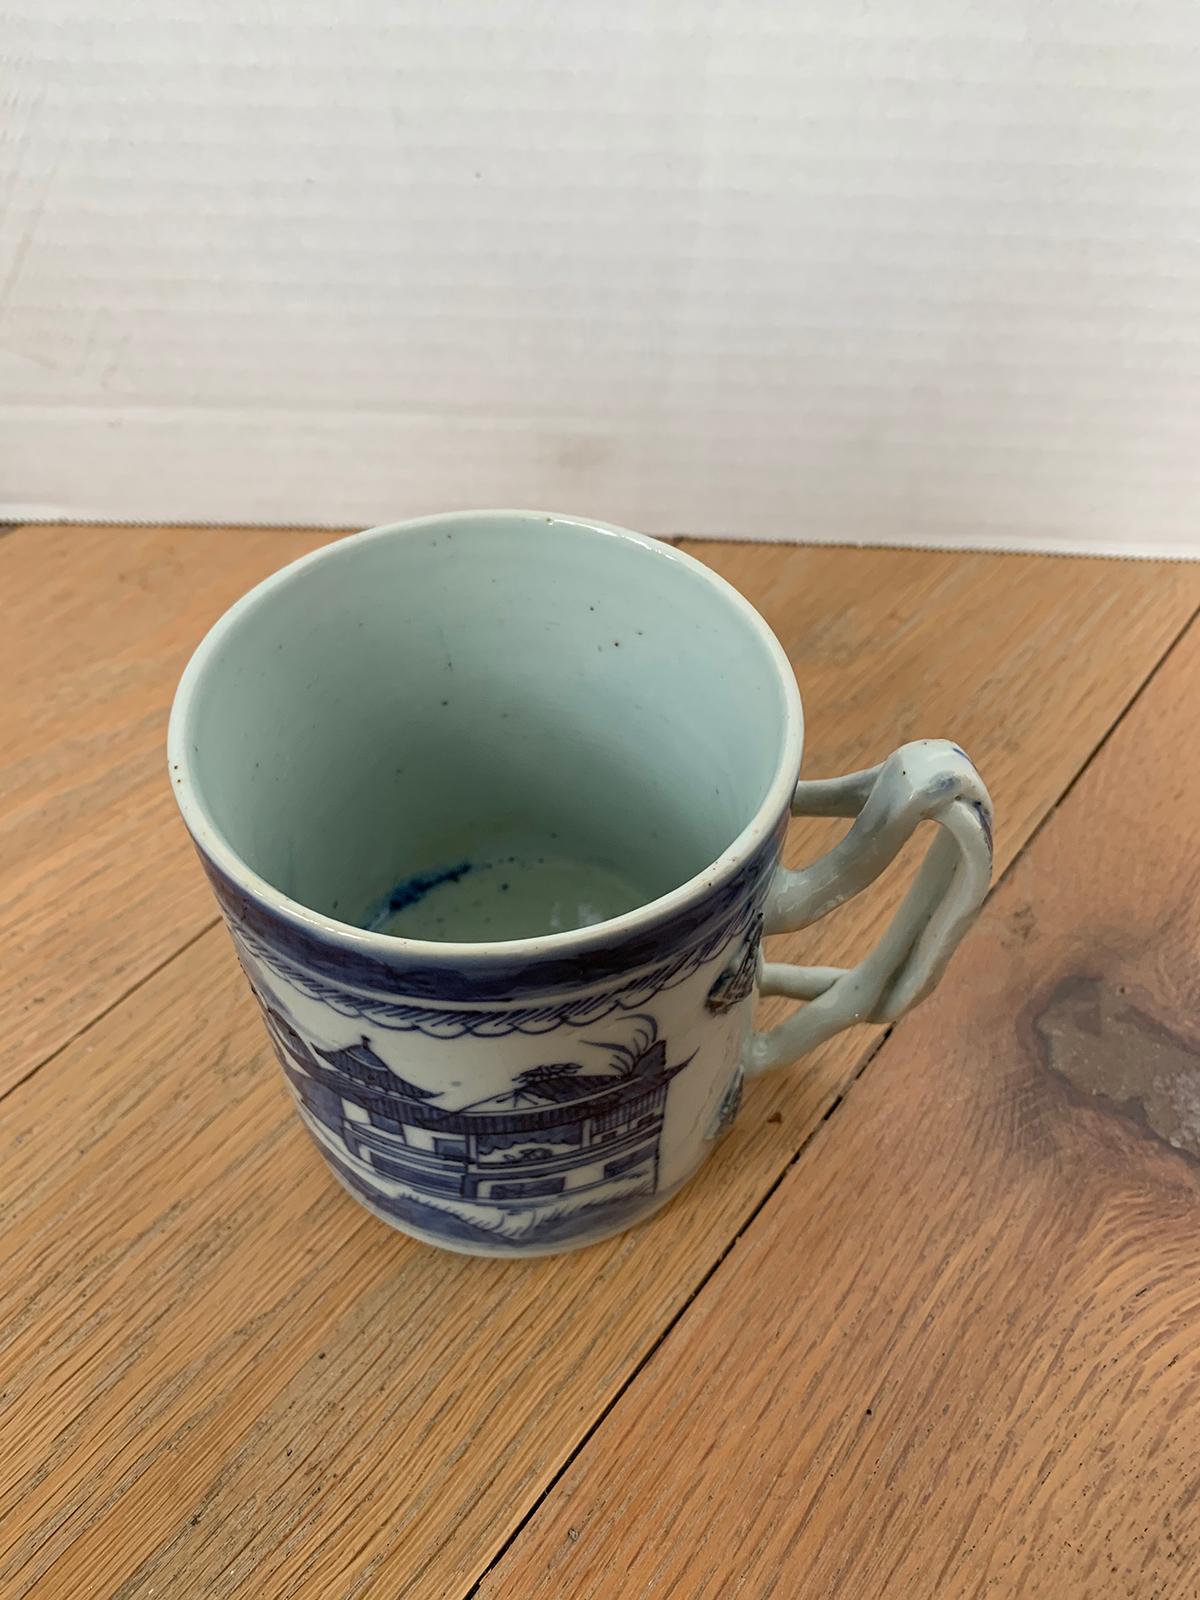 unmarked chinese porcelain